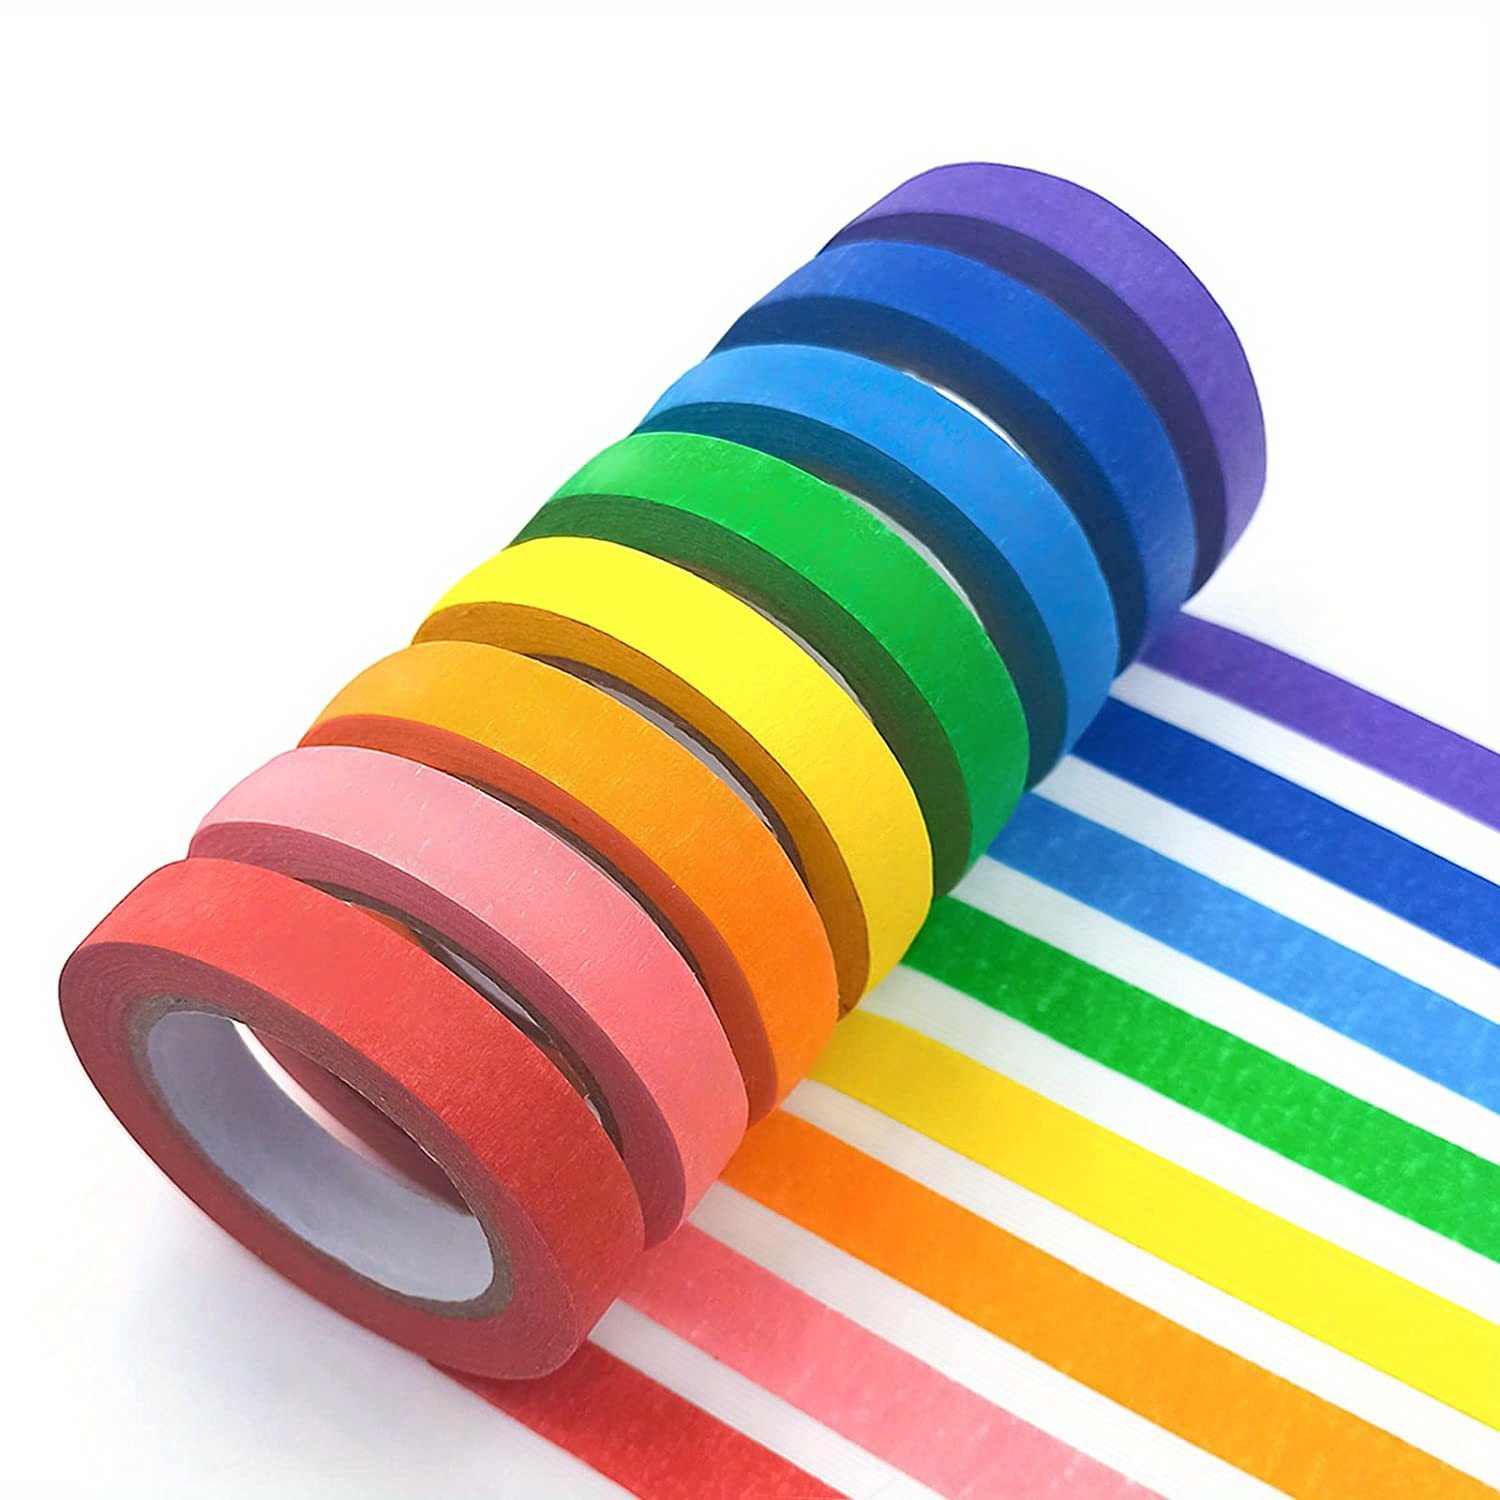 6 Rolls of Colored Masking Tape - Rainbow Colored Paint Tape Suitable for  Party Decoration Techniques and Labels (0.6 Inches)